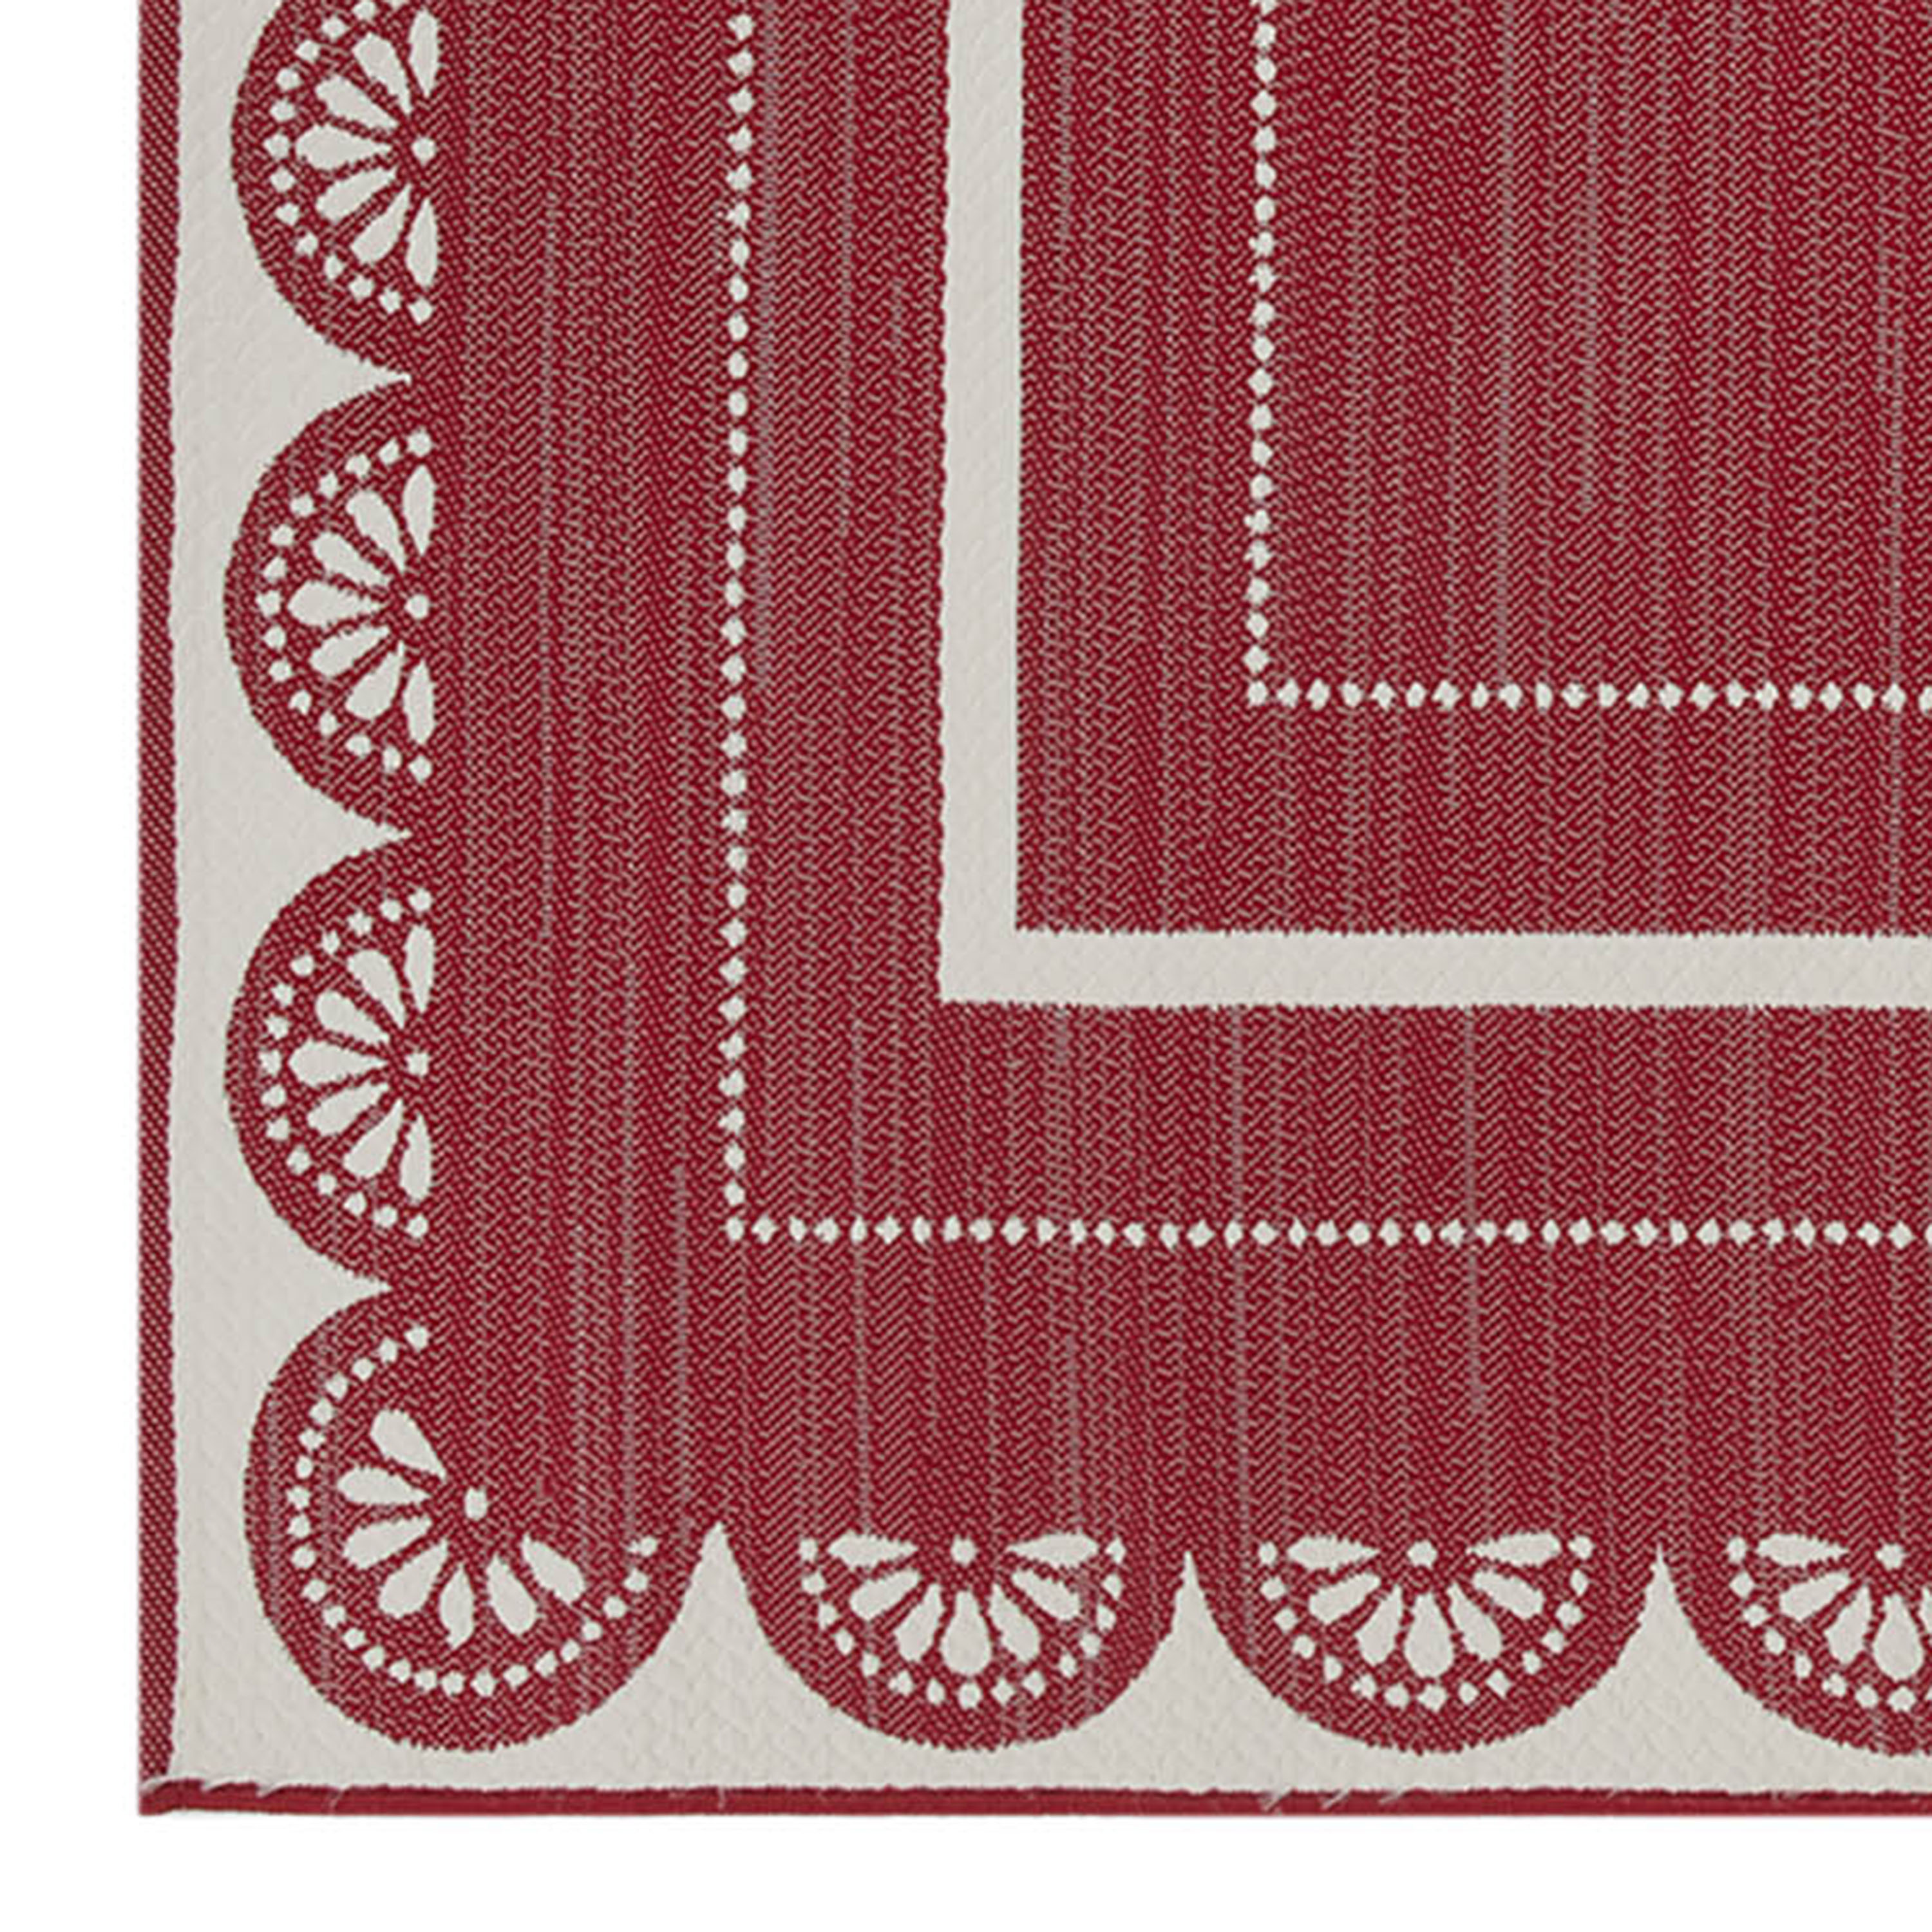 The Pioneer Woman Red Scallop Outdoor Rug, 5' x 7' - image 2 of 5